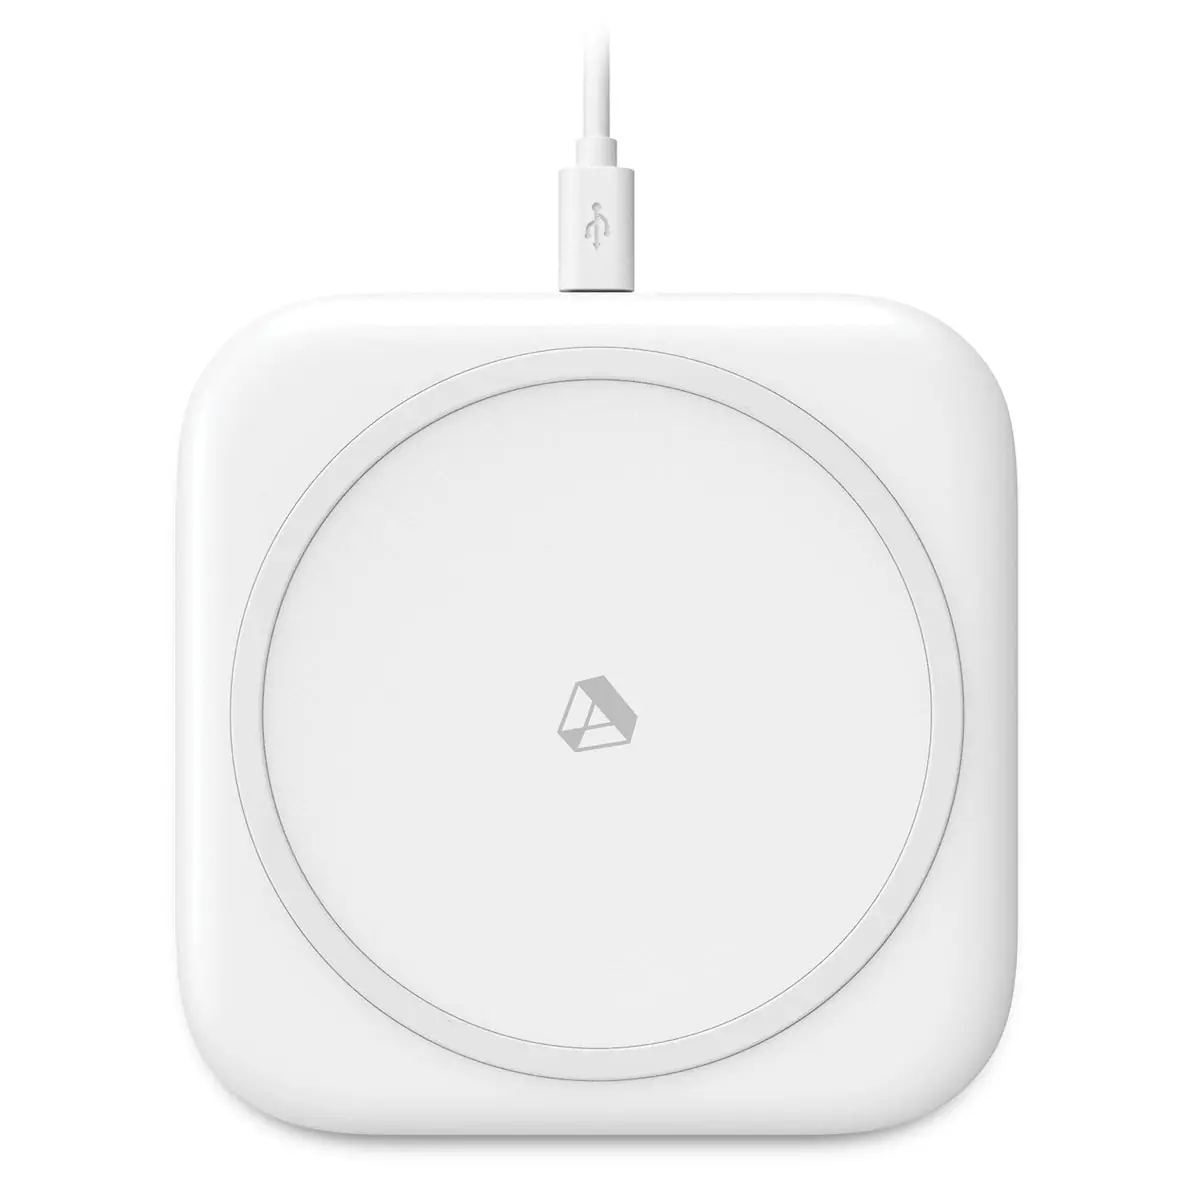 Adreama Wireless Charging Pad, square-shaped, white, with a stylish and modern design that can deliver a 15W wireless charging output.